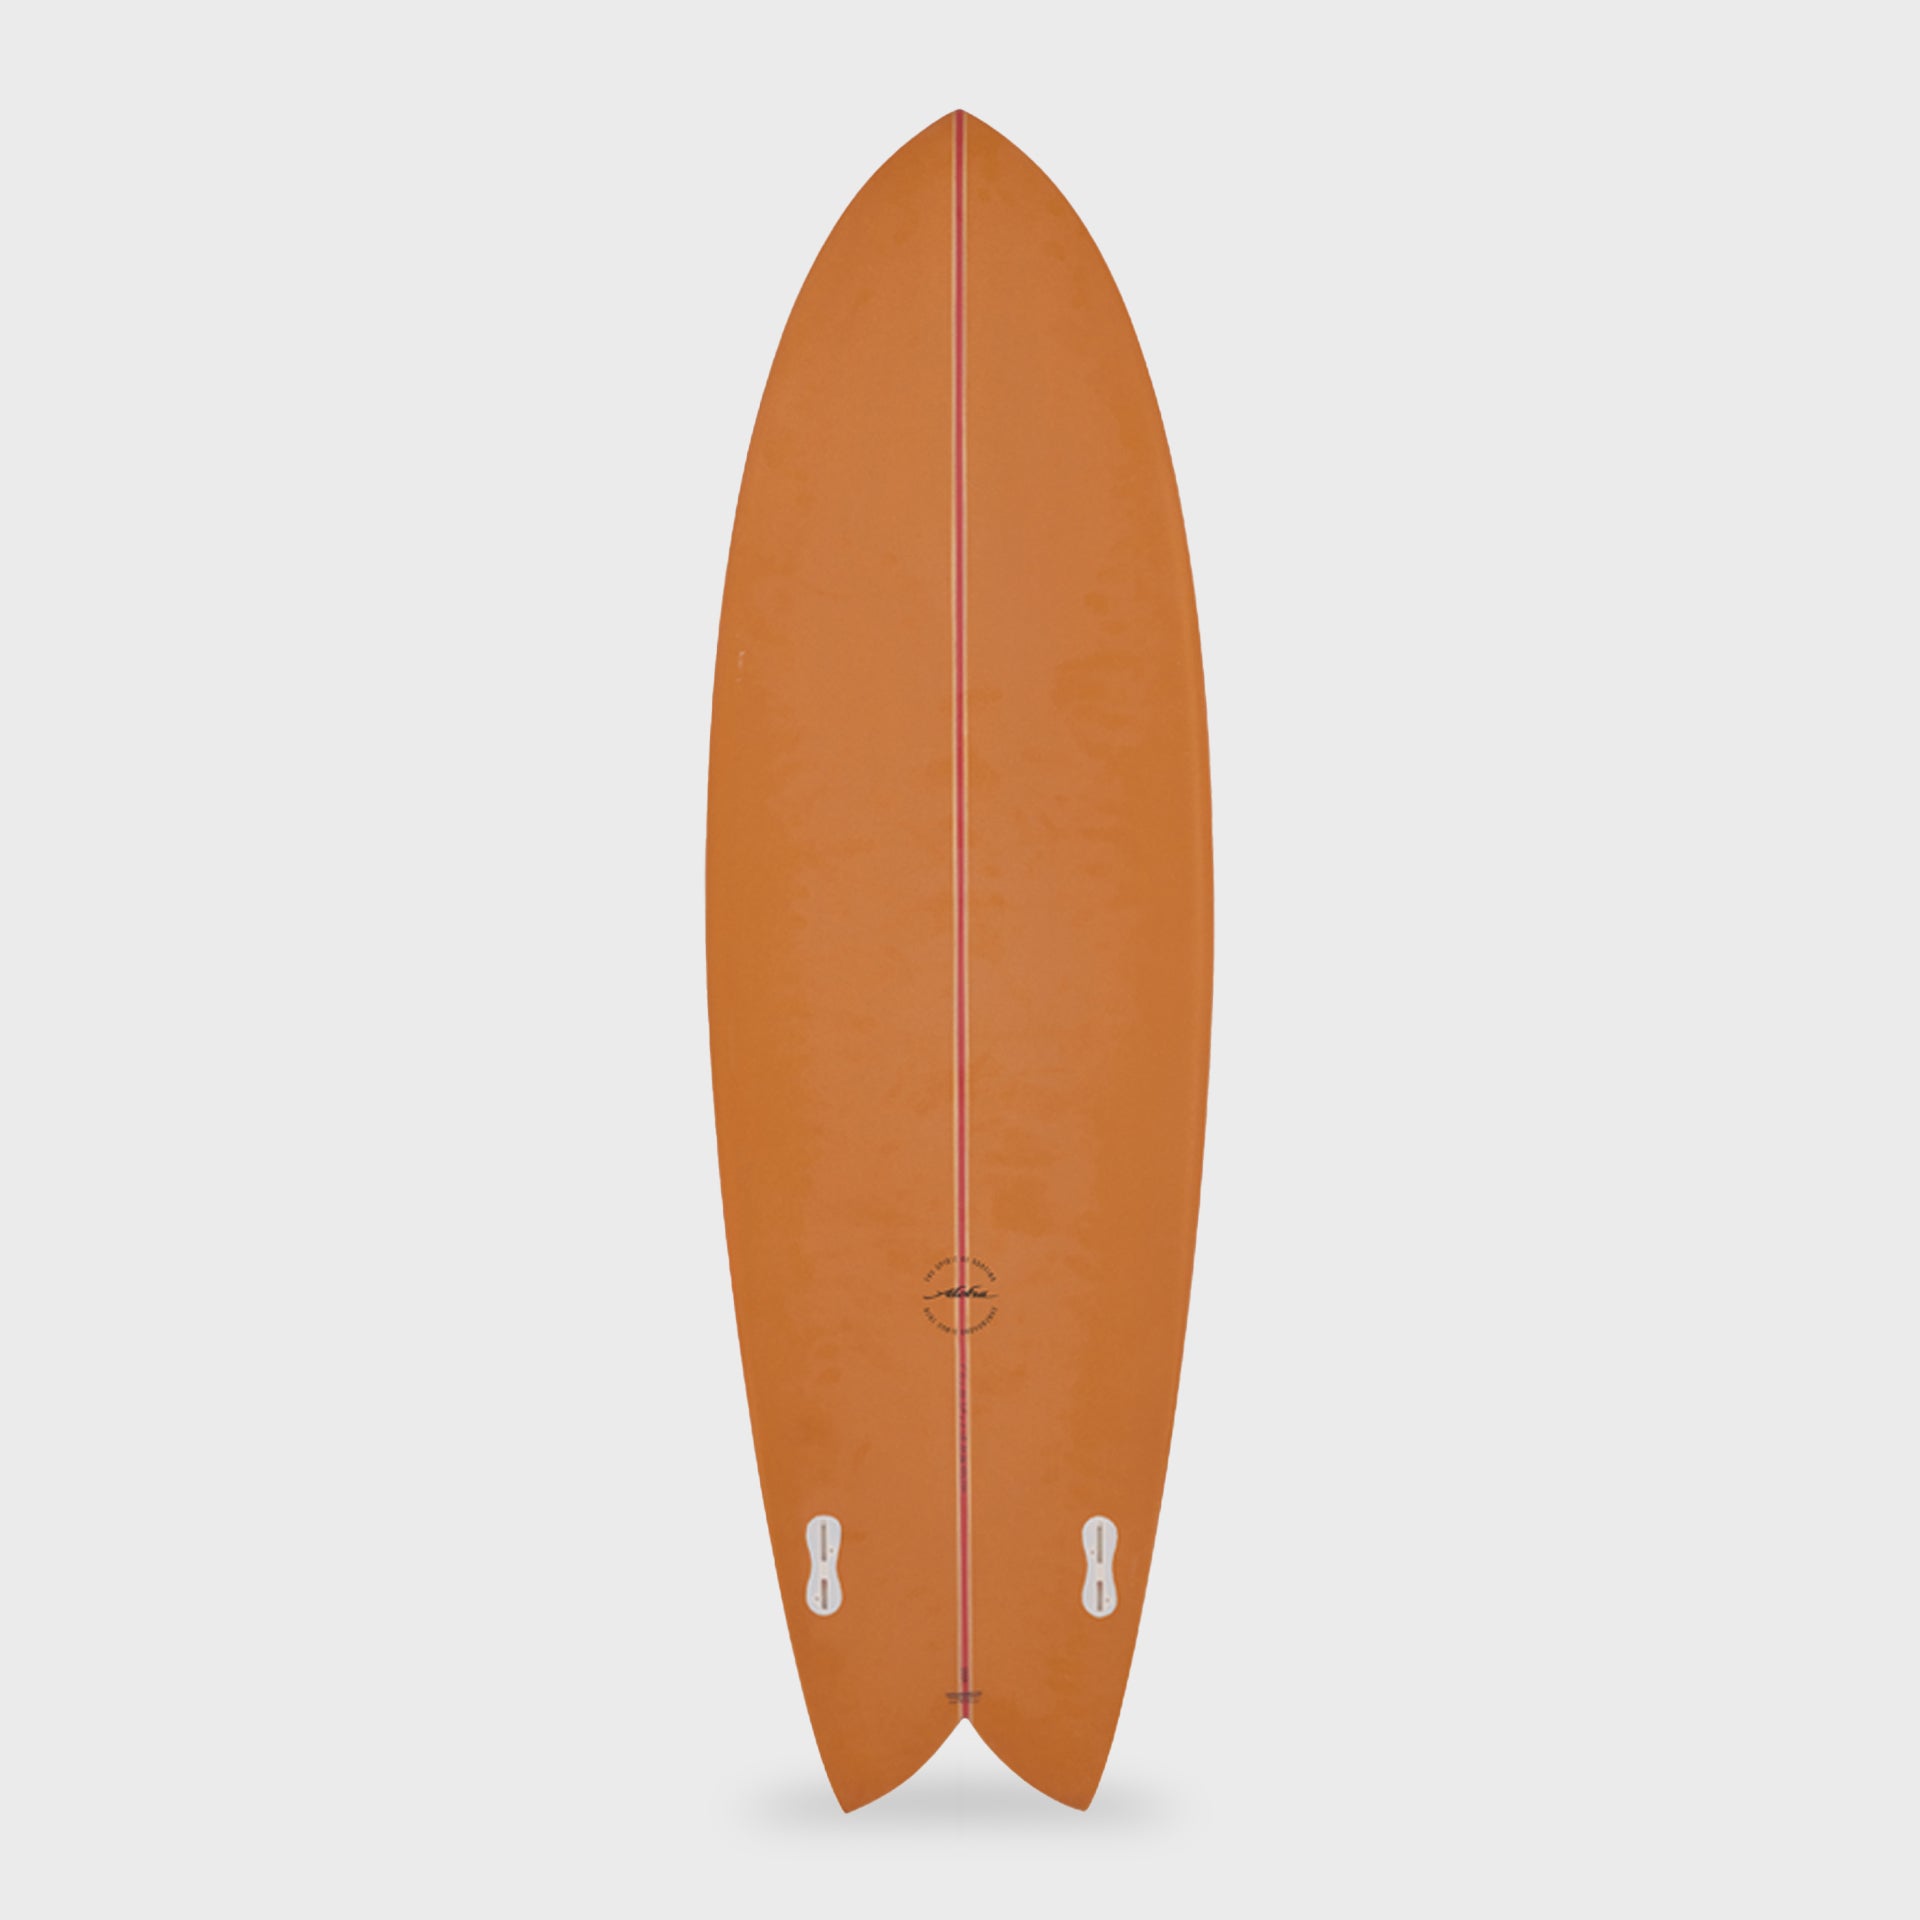 Keel Twin PVCP Fish Surfboard - 5'8, 5'10, 6'0 and 6'4 - Mustard Colour - ManGo Surfing